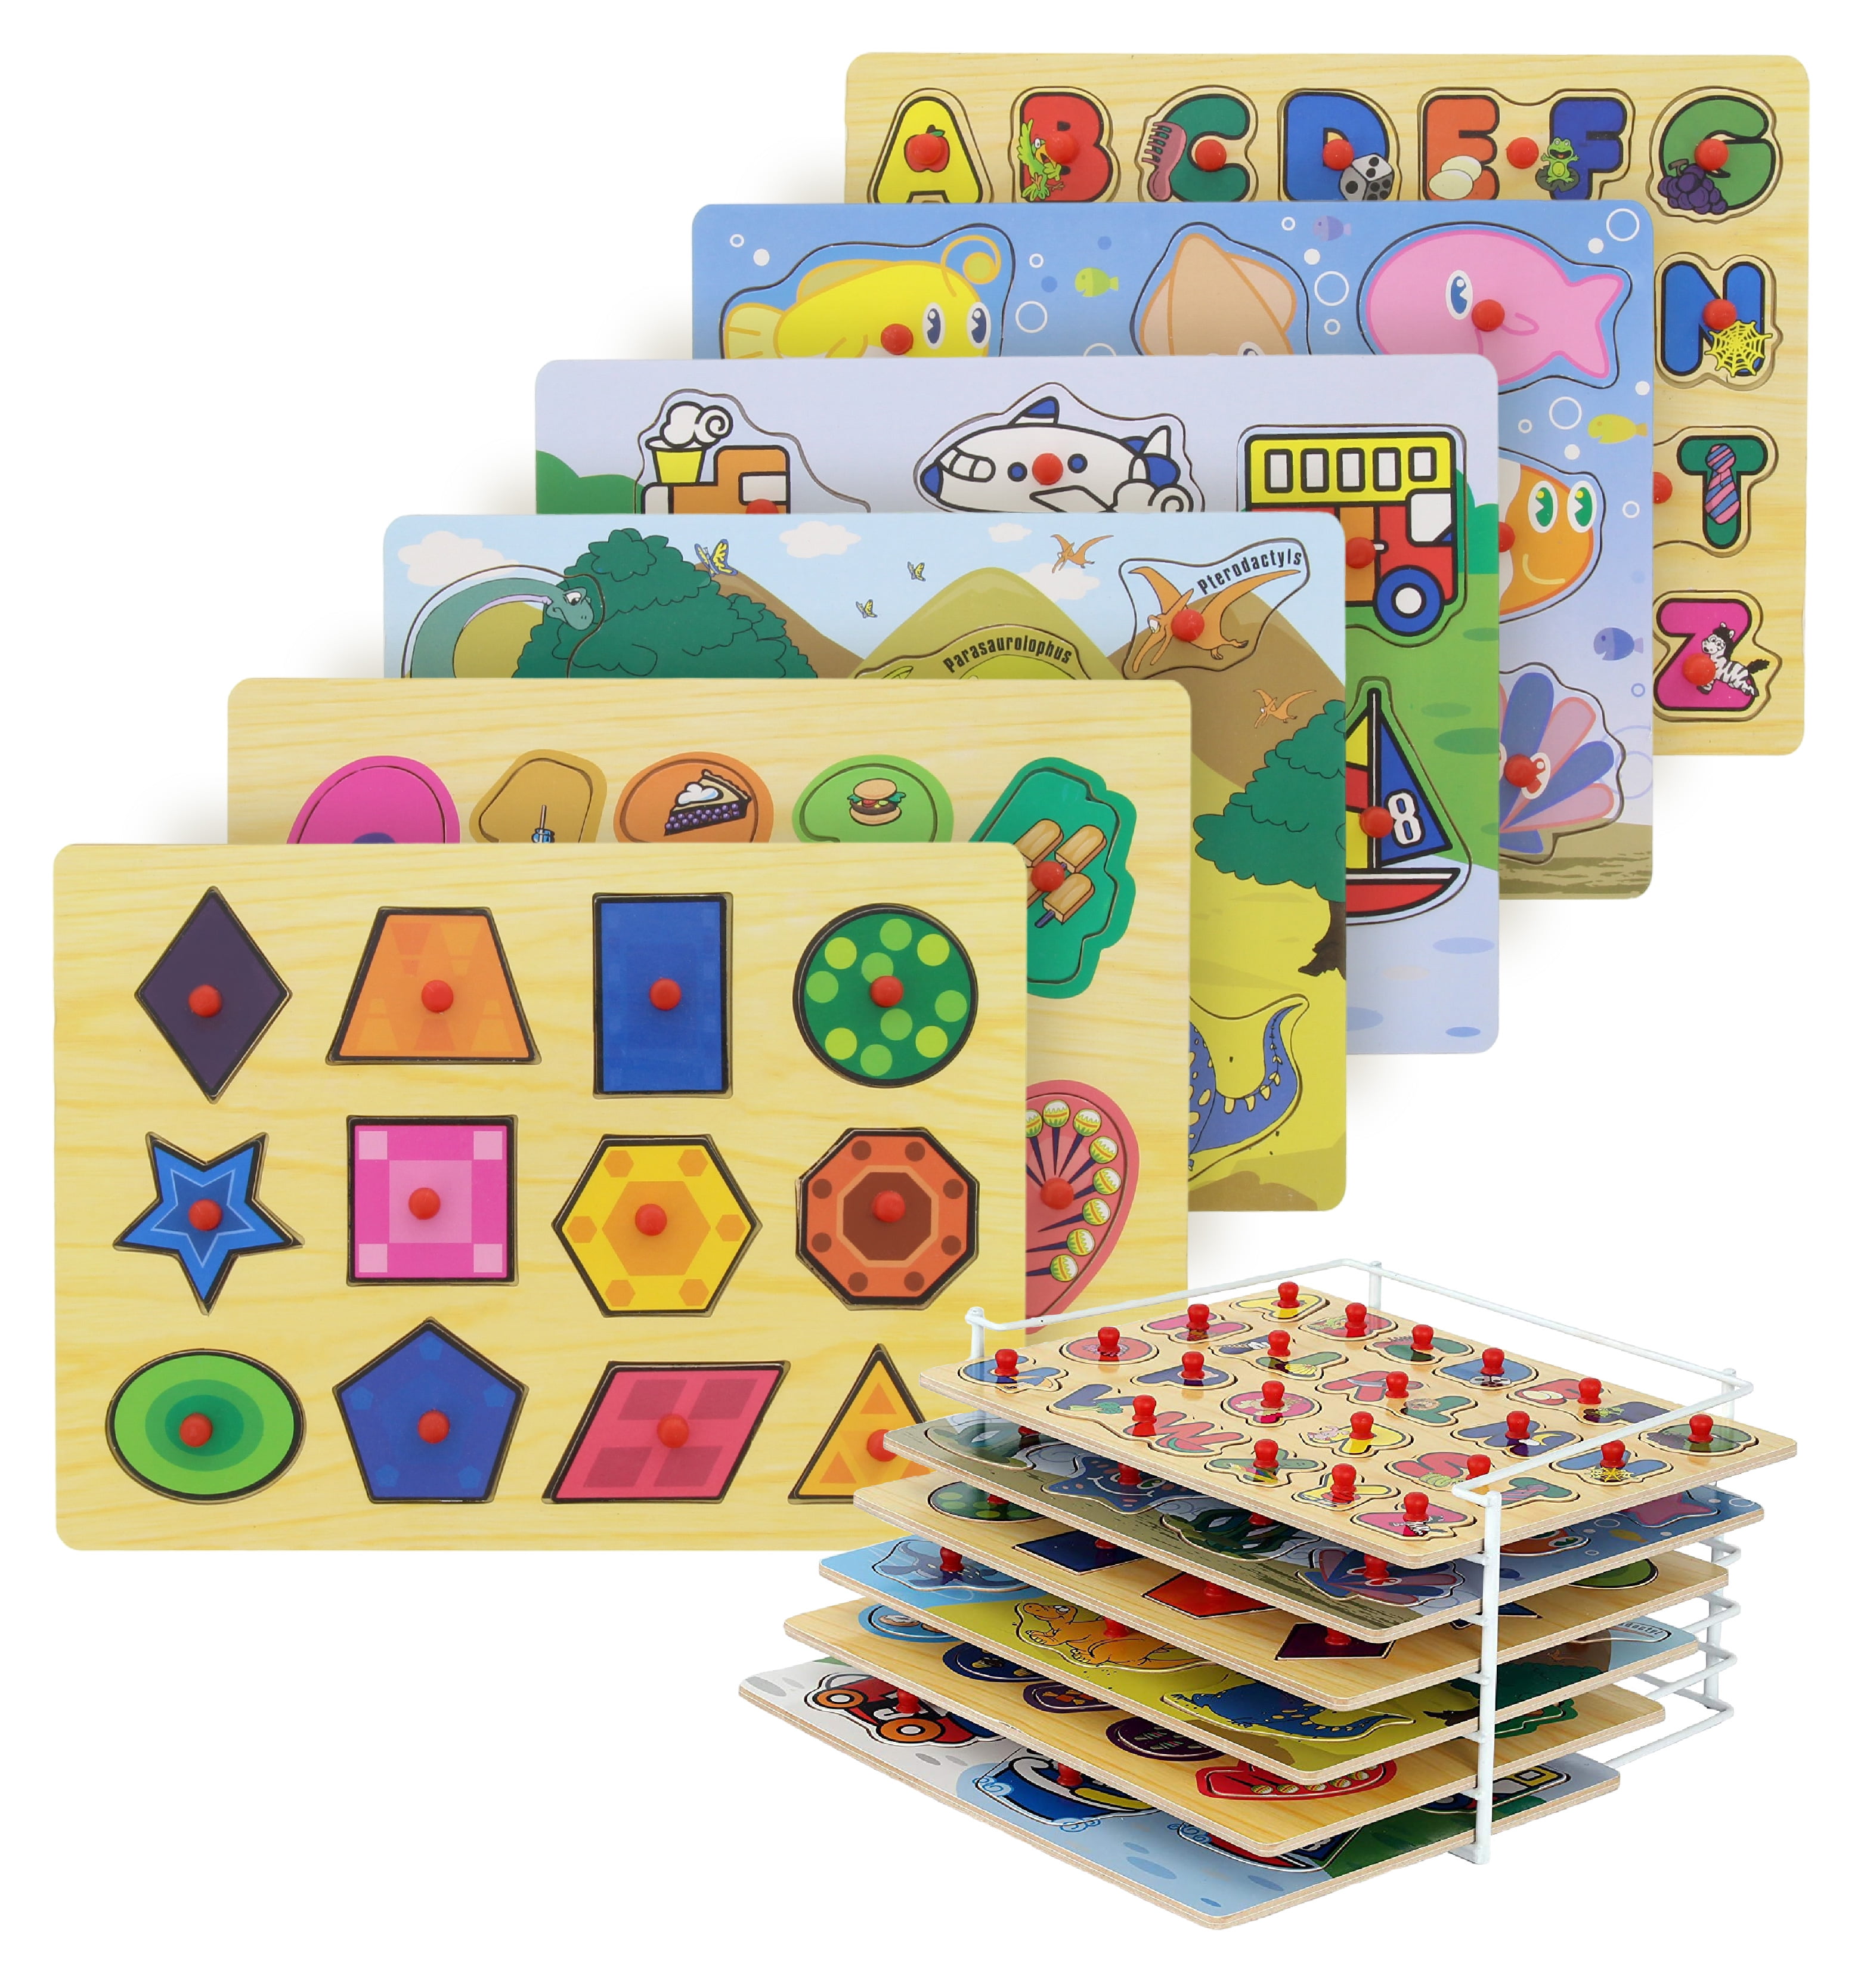 24 CHILDREN MINI LEARNING WOODEN PUZZLES JIGSAW EDUCATIONAL TOY FULL BOX 